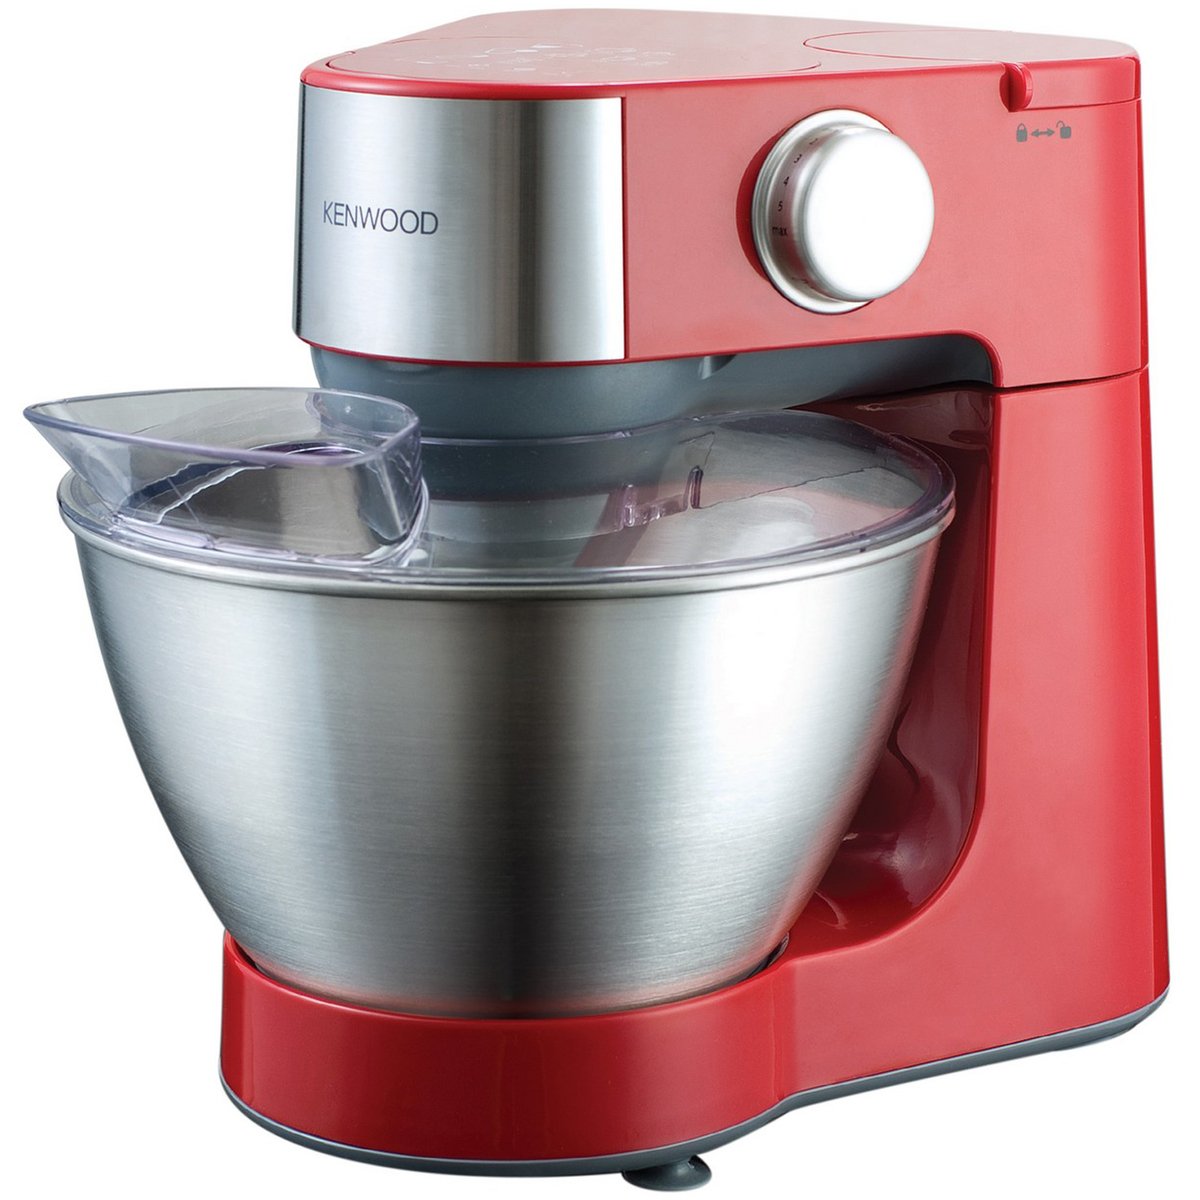 Kenwood Stand Mixer Kitchen Machine PROSPERO 900W with 4.3L Stainless Steel Bowl, K-Beater, Whisk, Dough Hook, Blender KM241006 Red